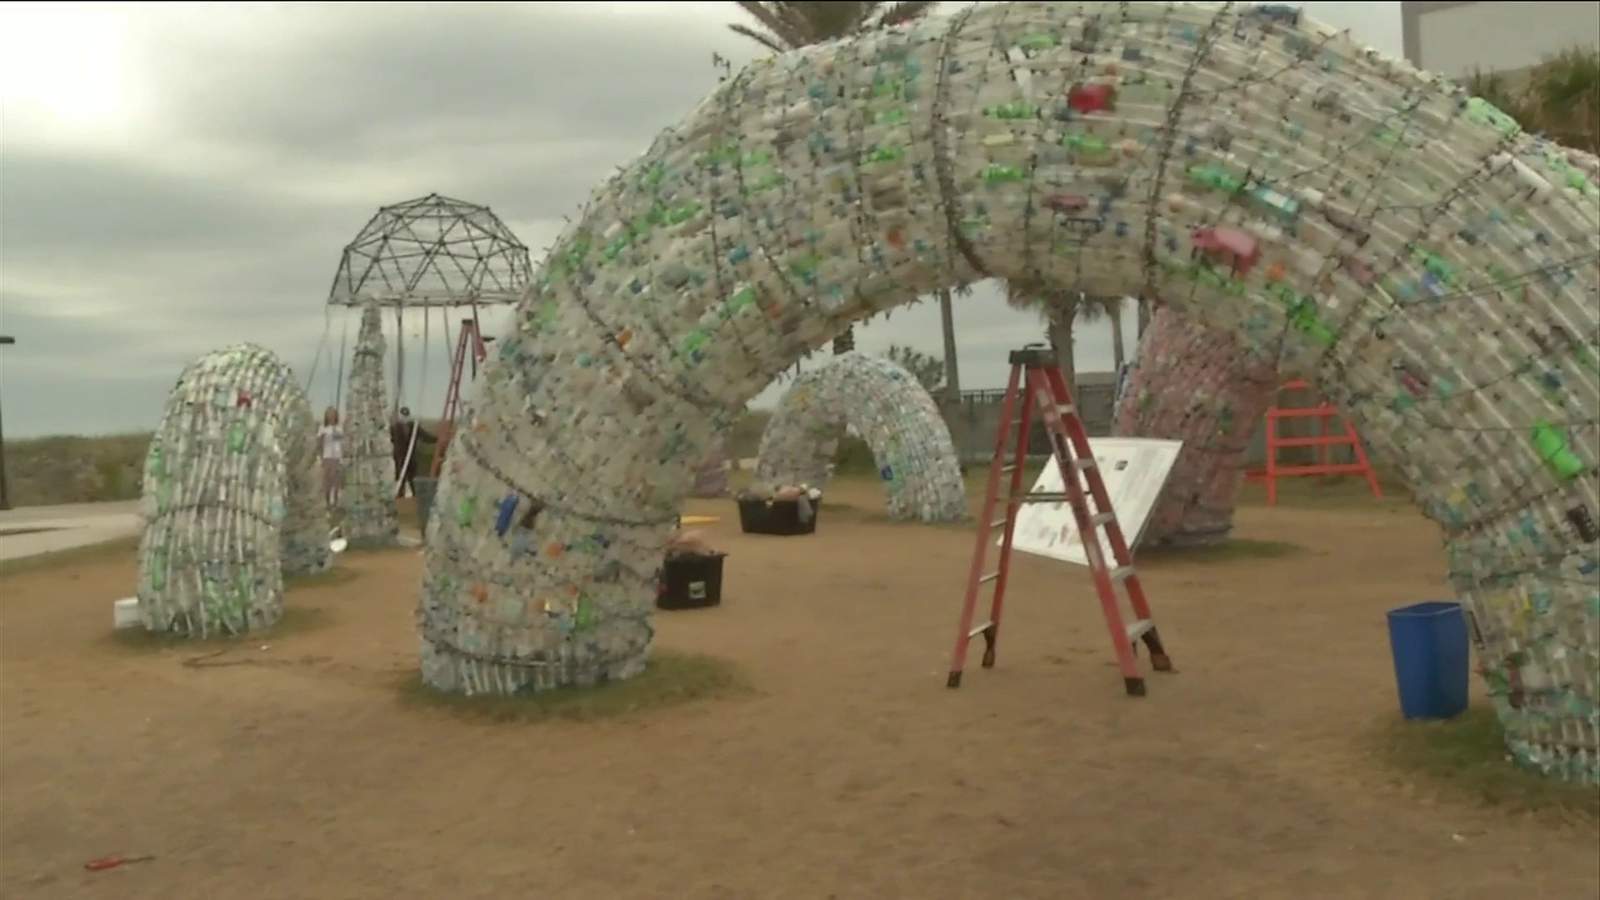 Plastic octopus to continue to spread environmental awareness at new home